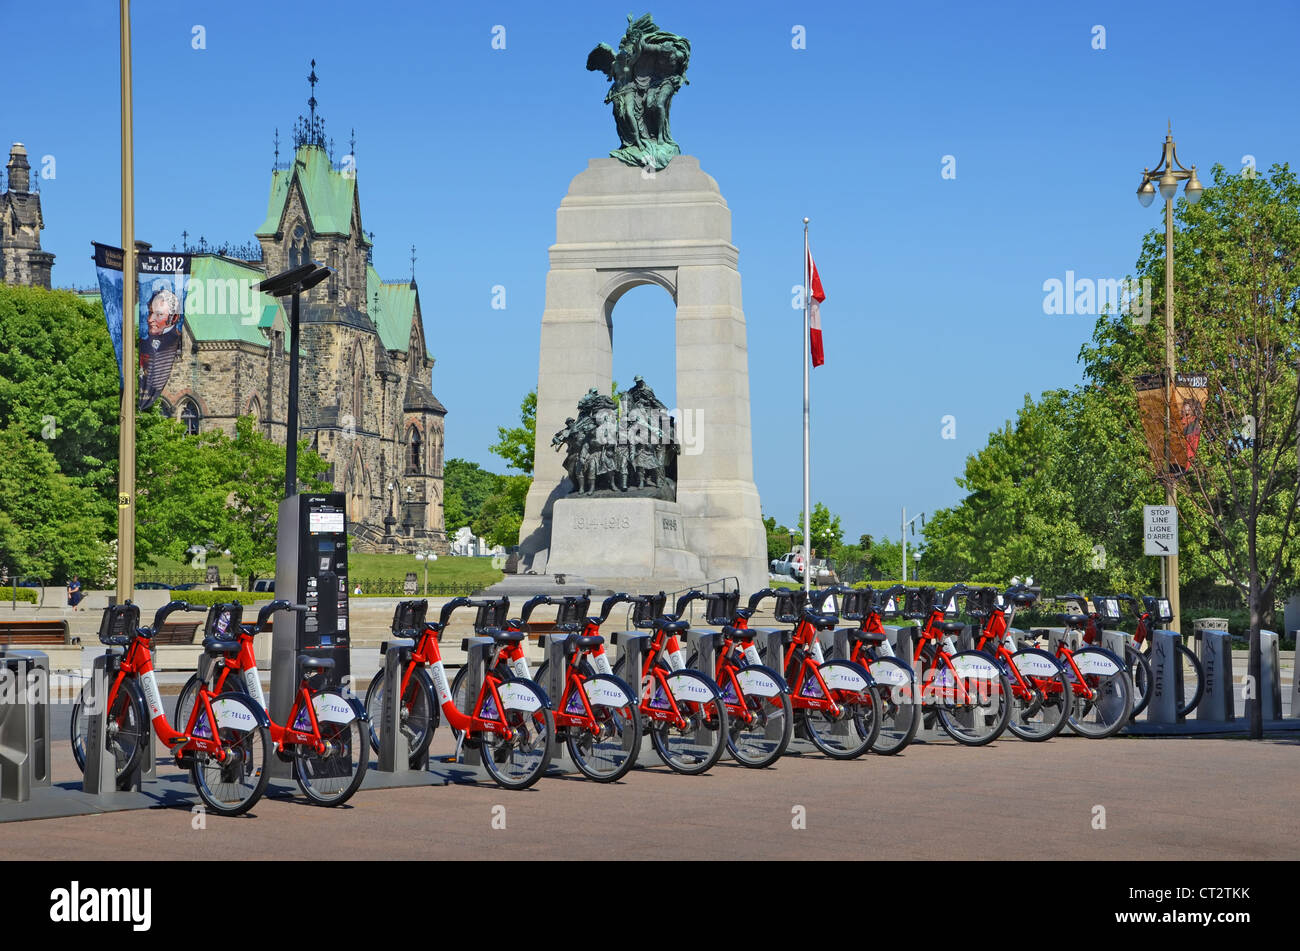 Bicycles for hire at Ottawa, Ontario, Canada. In the background is the Canadian National War Memorial. Stock Photo